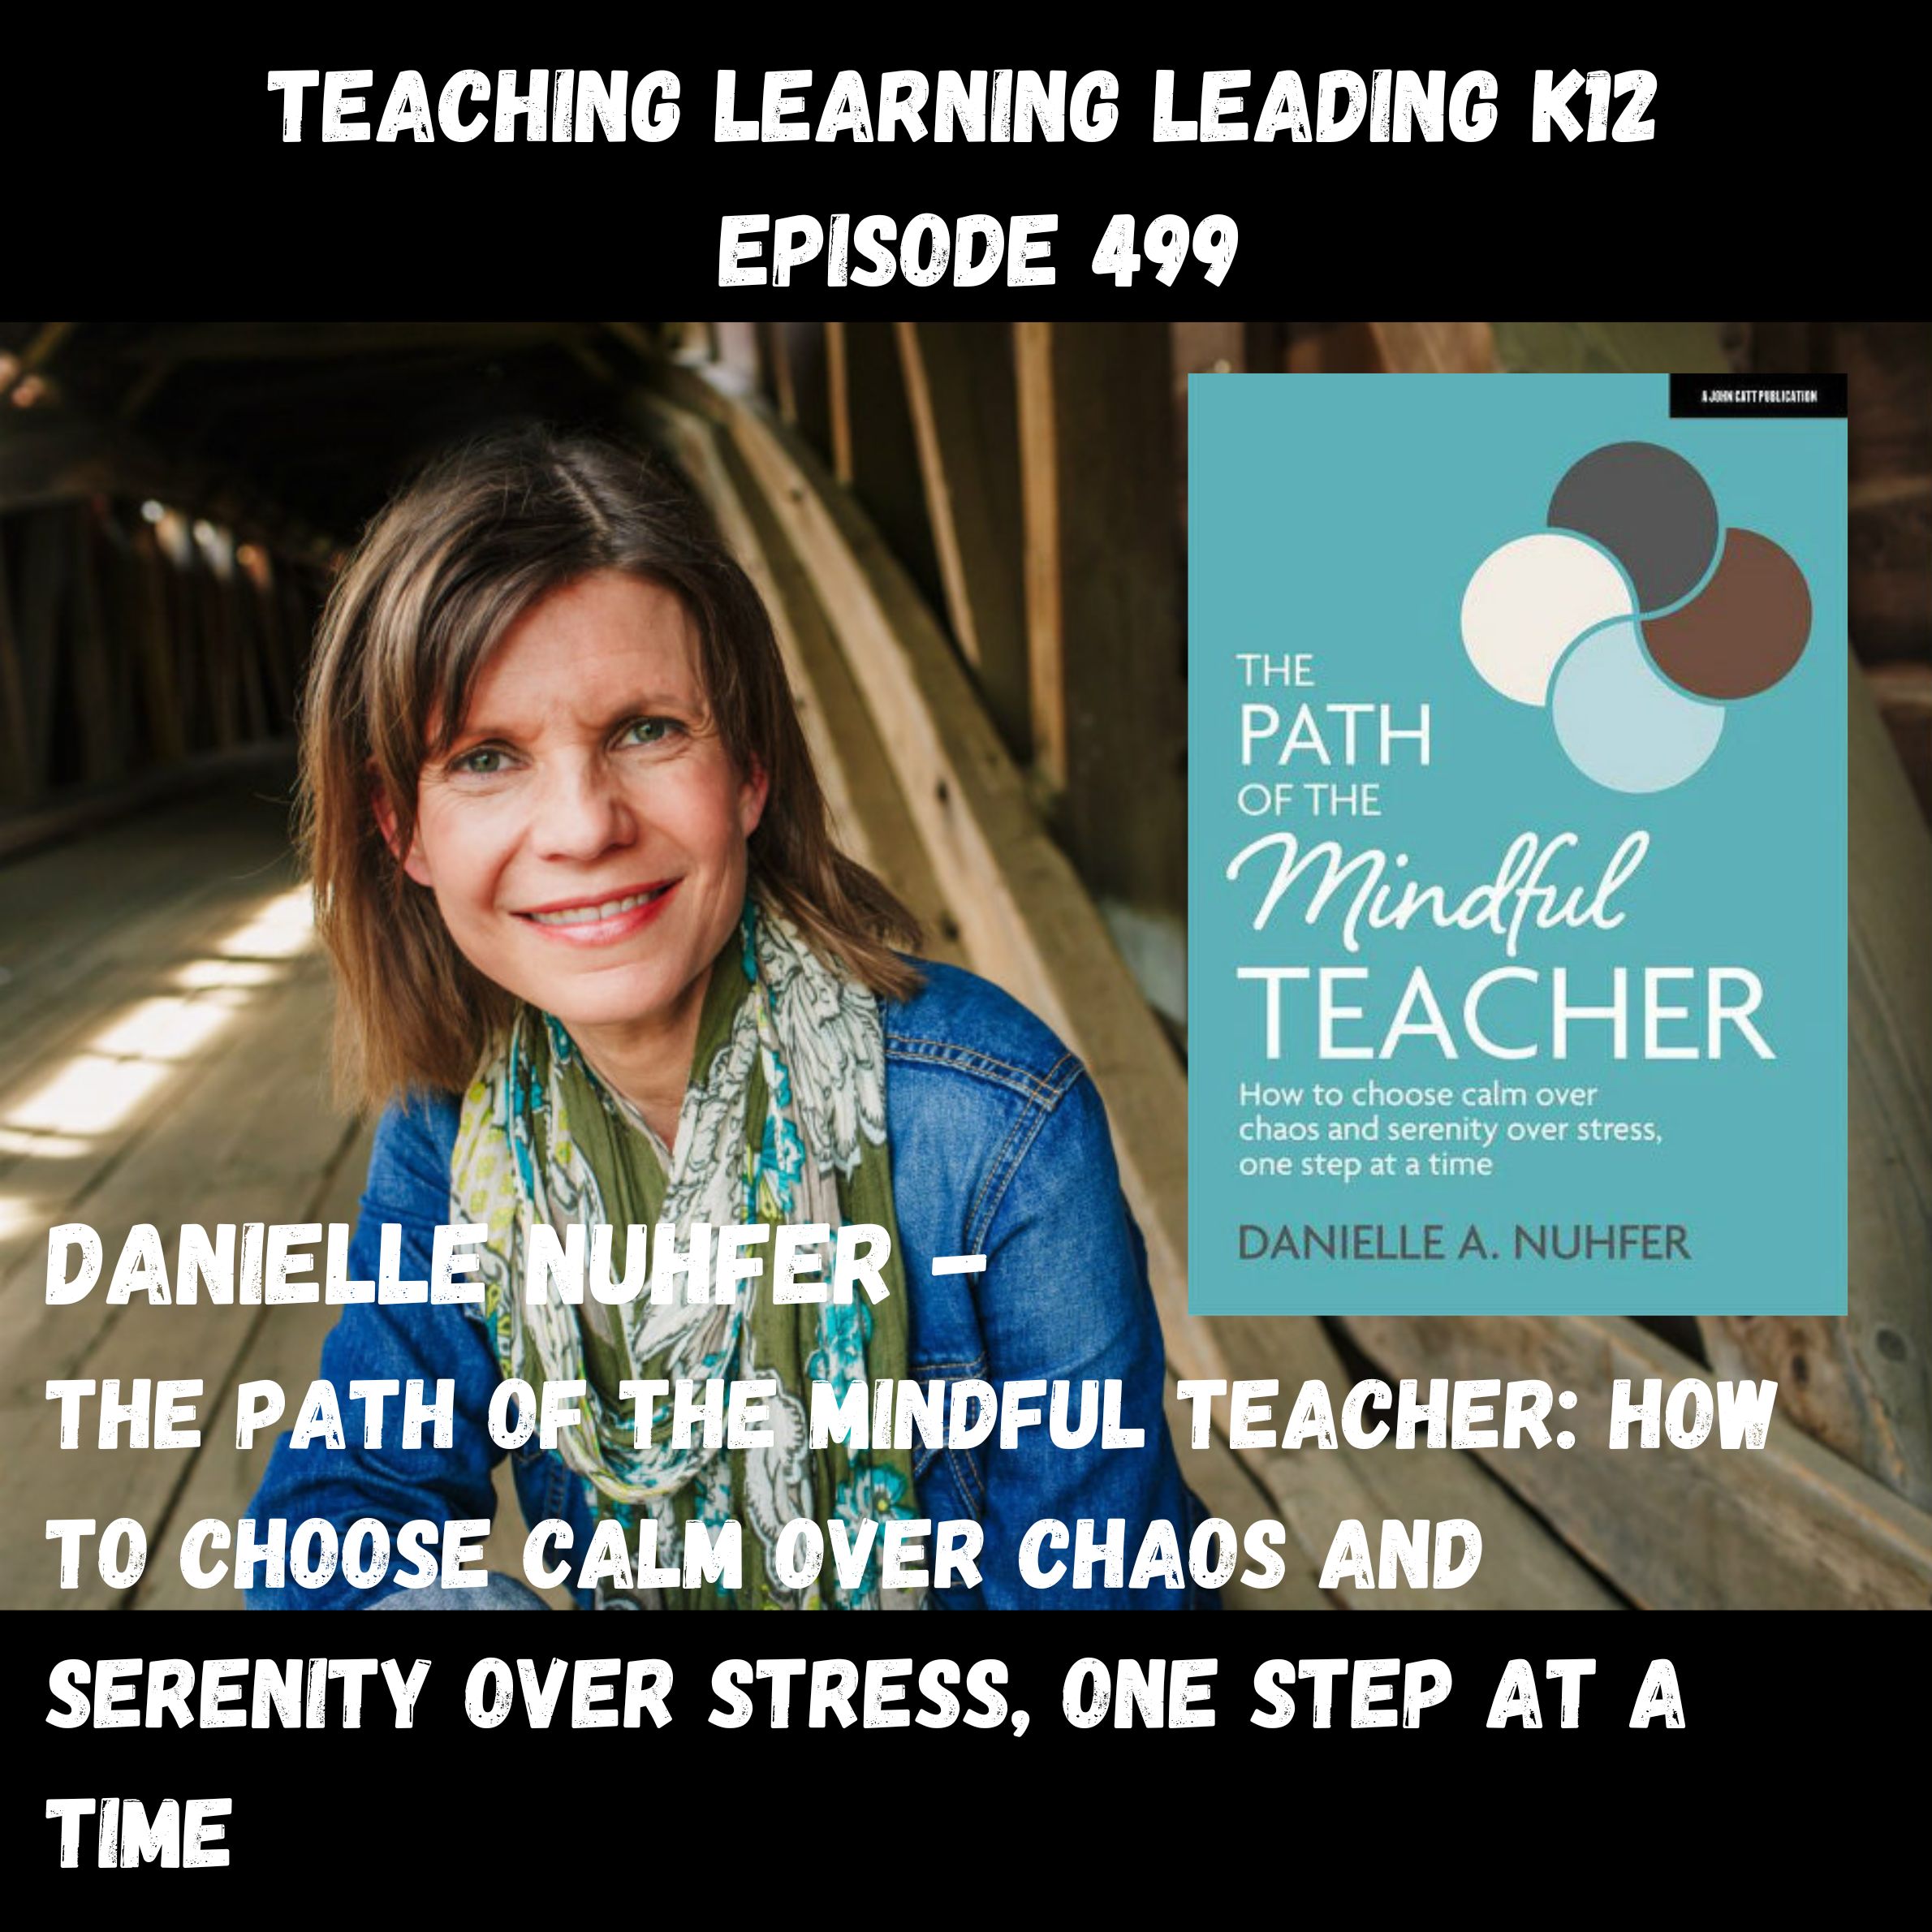 Danielle Nuhfer - The Path of the Mindful Teacher: How to Choose Calm Over Chaos and Serenity Over Stress, One Step at a Time - 499 Image